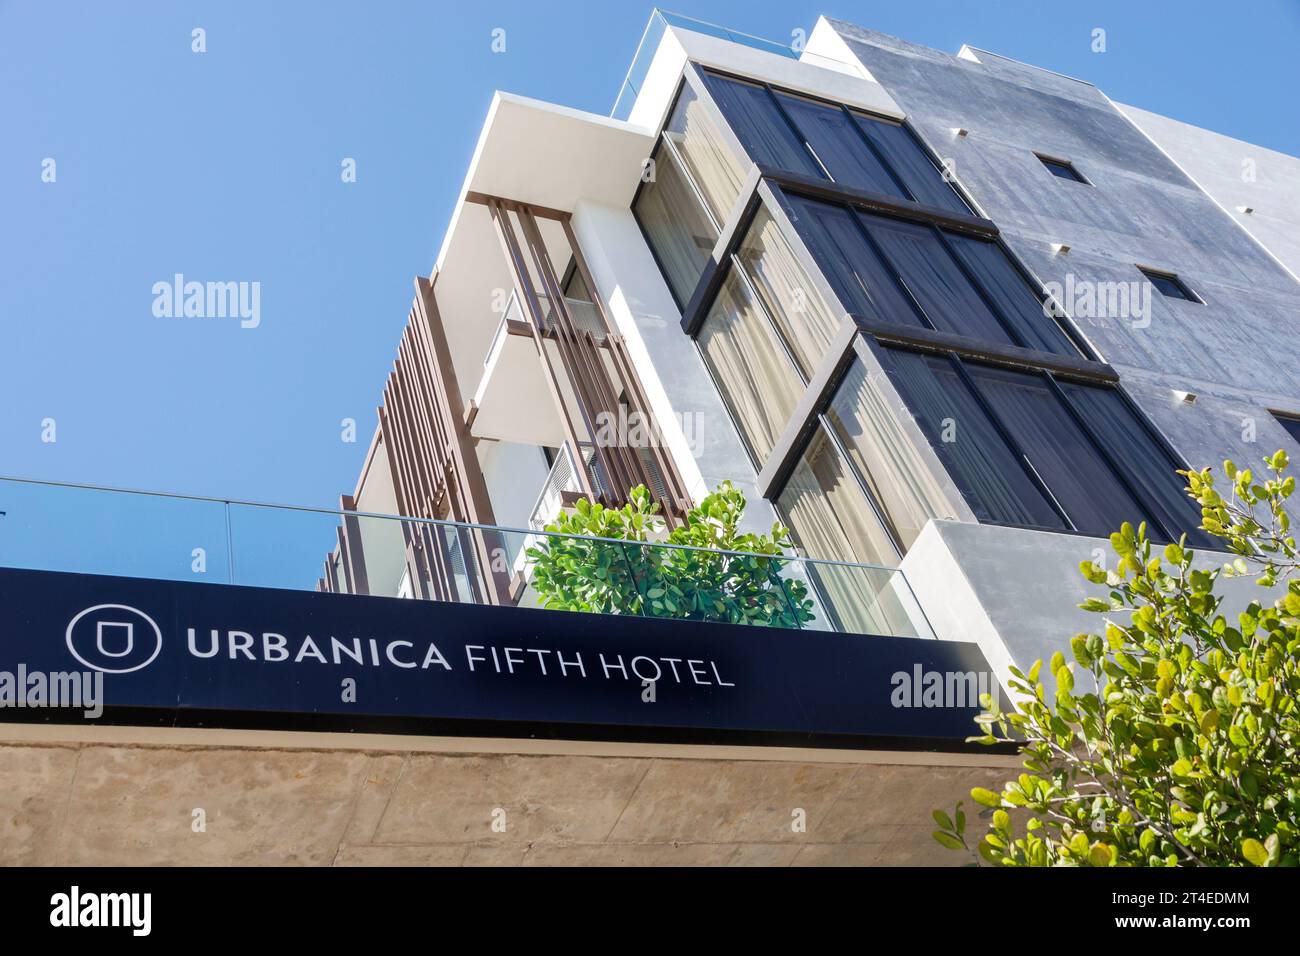 Miami Beach Florida,outside exterior,building front entrance hotel,Urbanica Fifth Hotel sign,hotels motels businesses Stock Photo